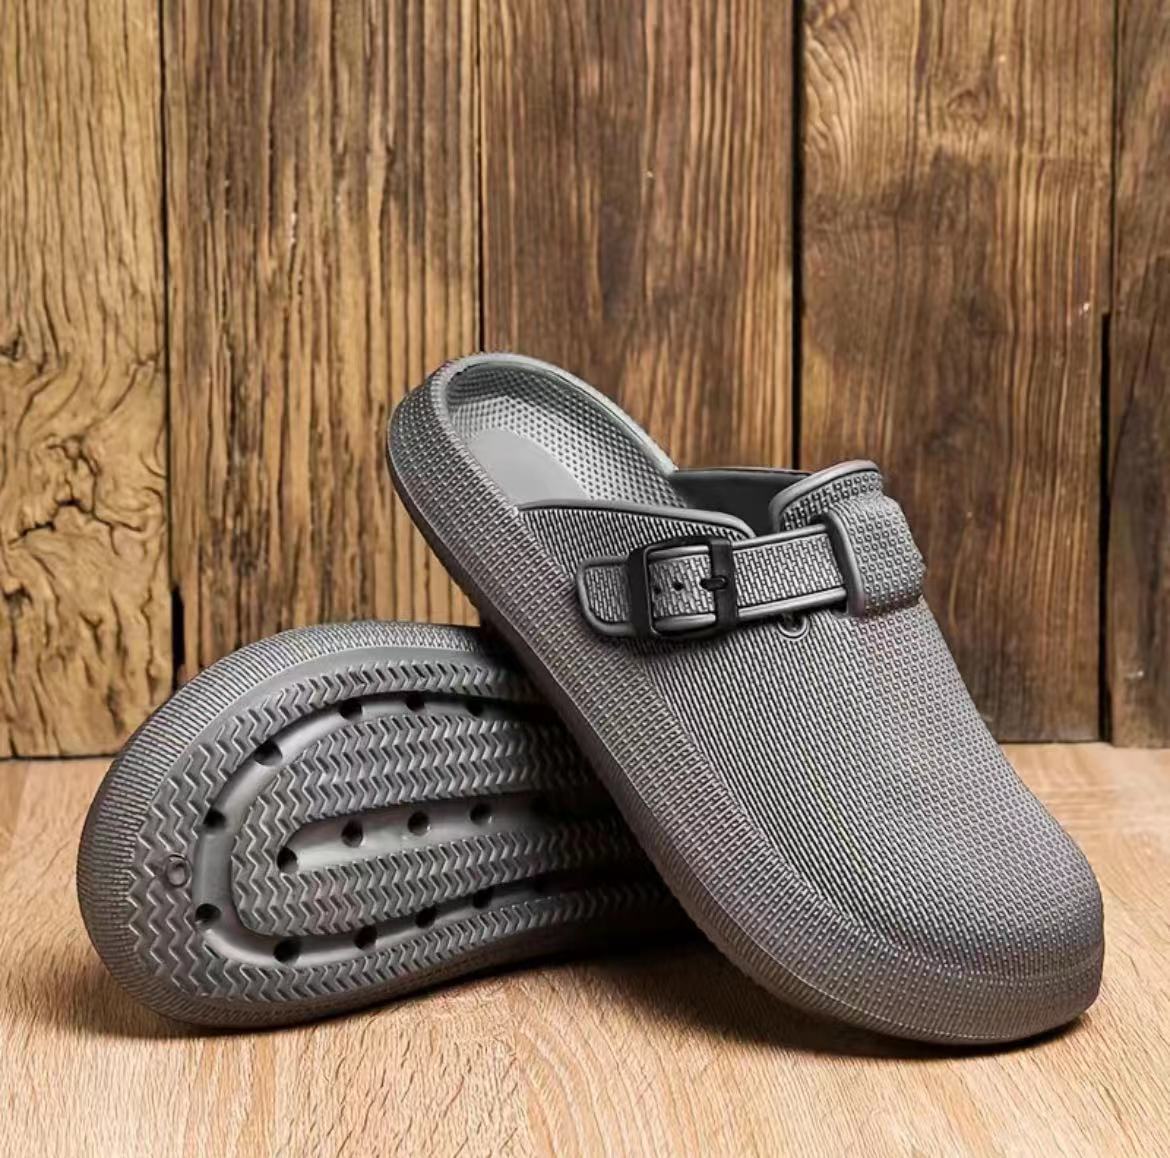 Wide Round Toe Flat Mules Clogs for Men Beach Sandals Quick Drying Water Shoes